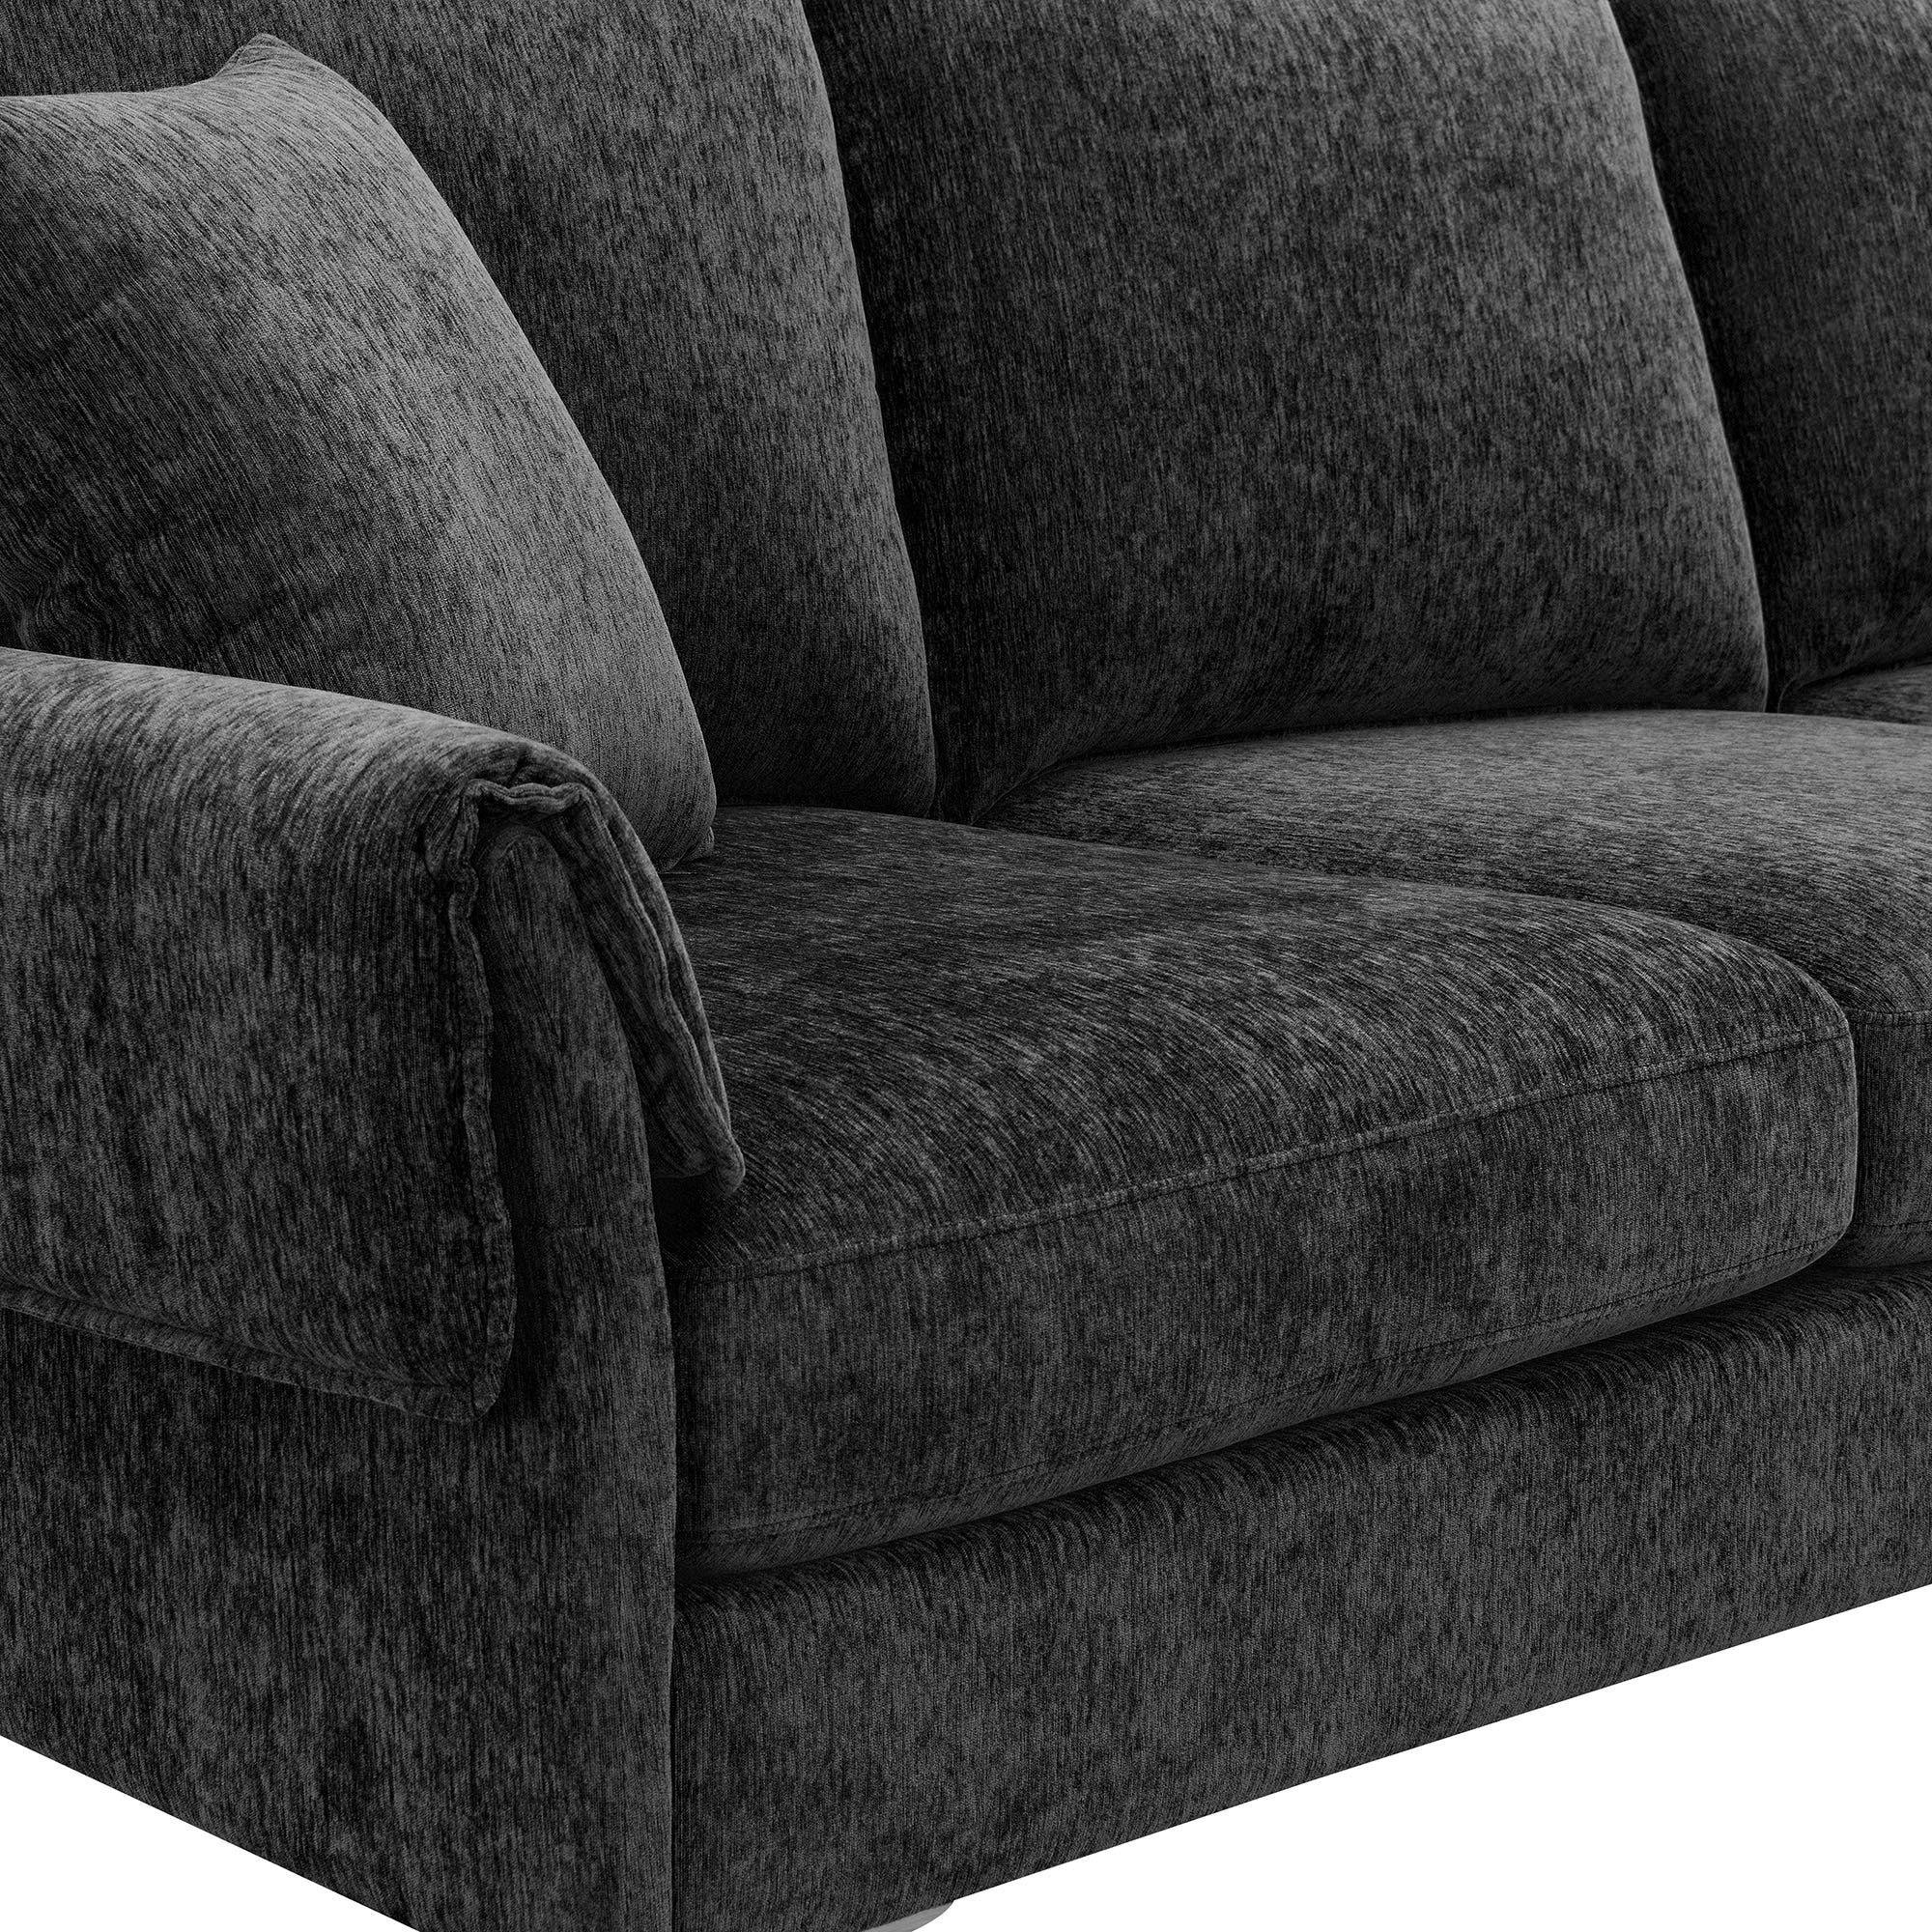 84 " Convertible Sectional Sofa, Modern Chenille L-Shaped Sofa Couch with Reversible Chaise Lounge, Fit for Living Room, Apartment (2 Pillows) - Black